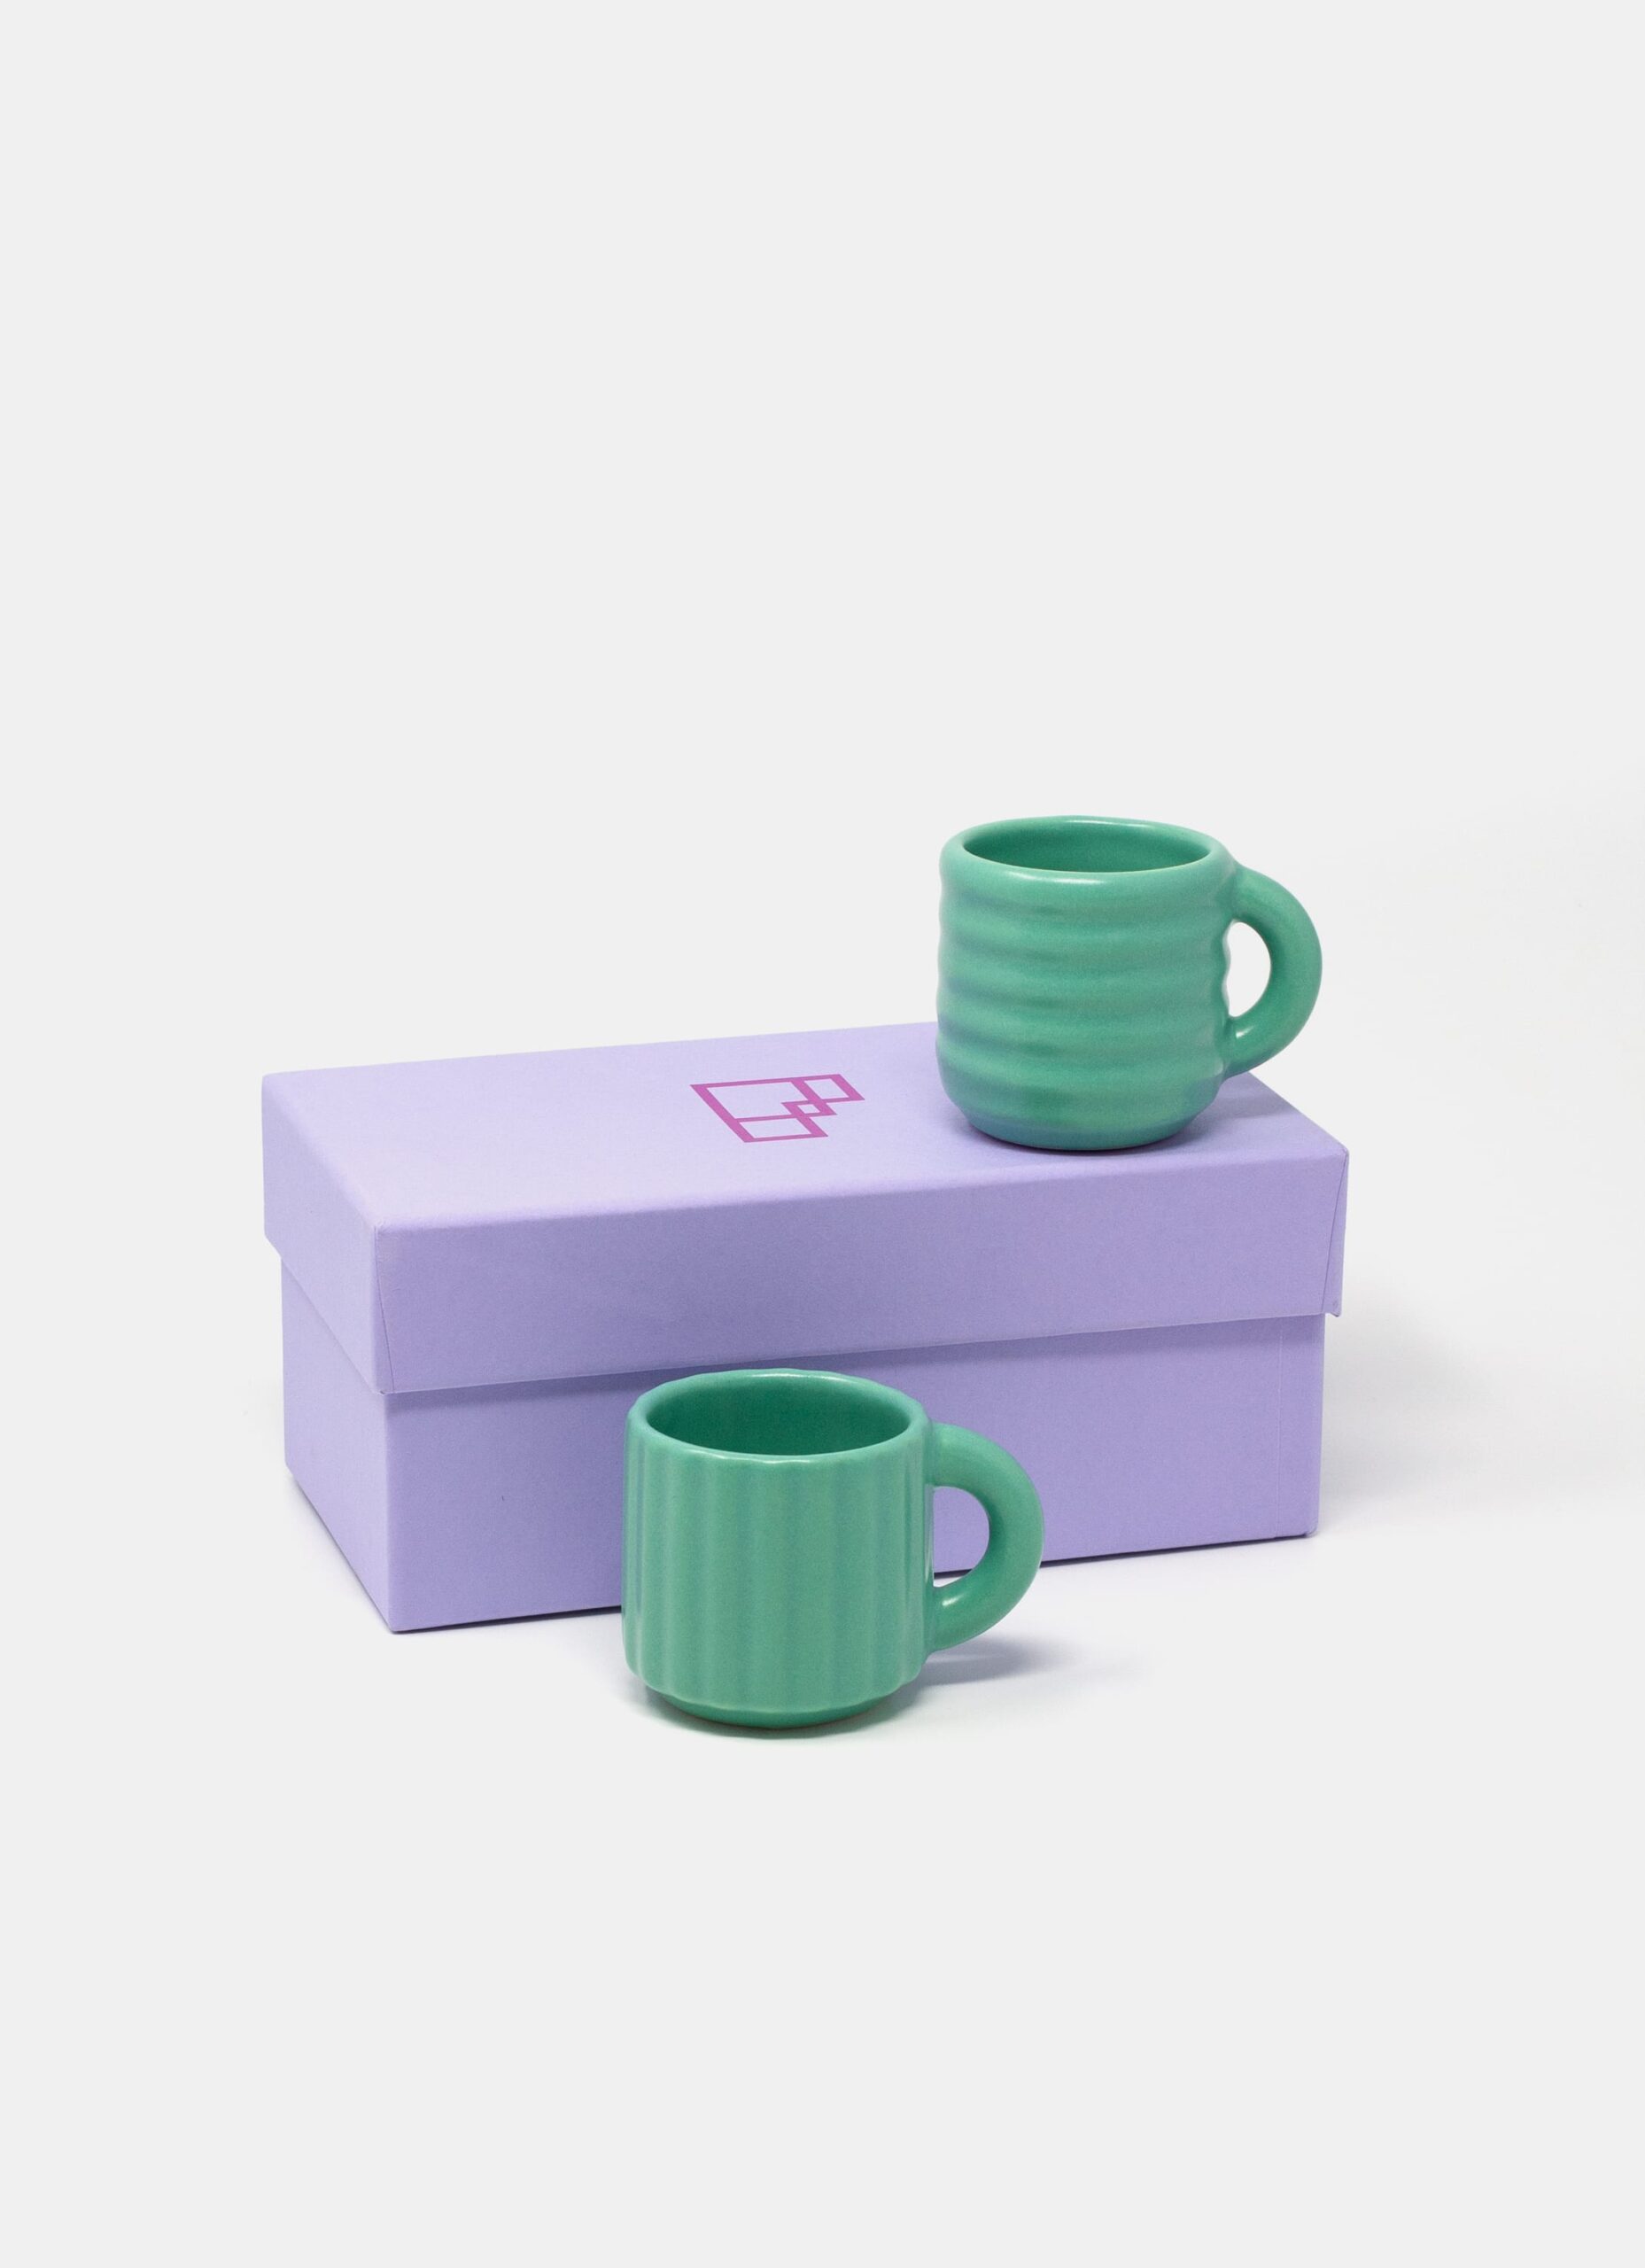 Form and Seek - Ripple Espresso Cups - Set of Two - Emerald